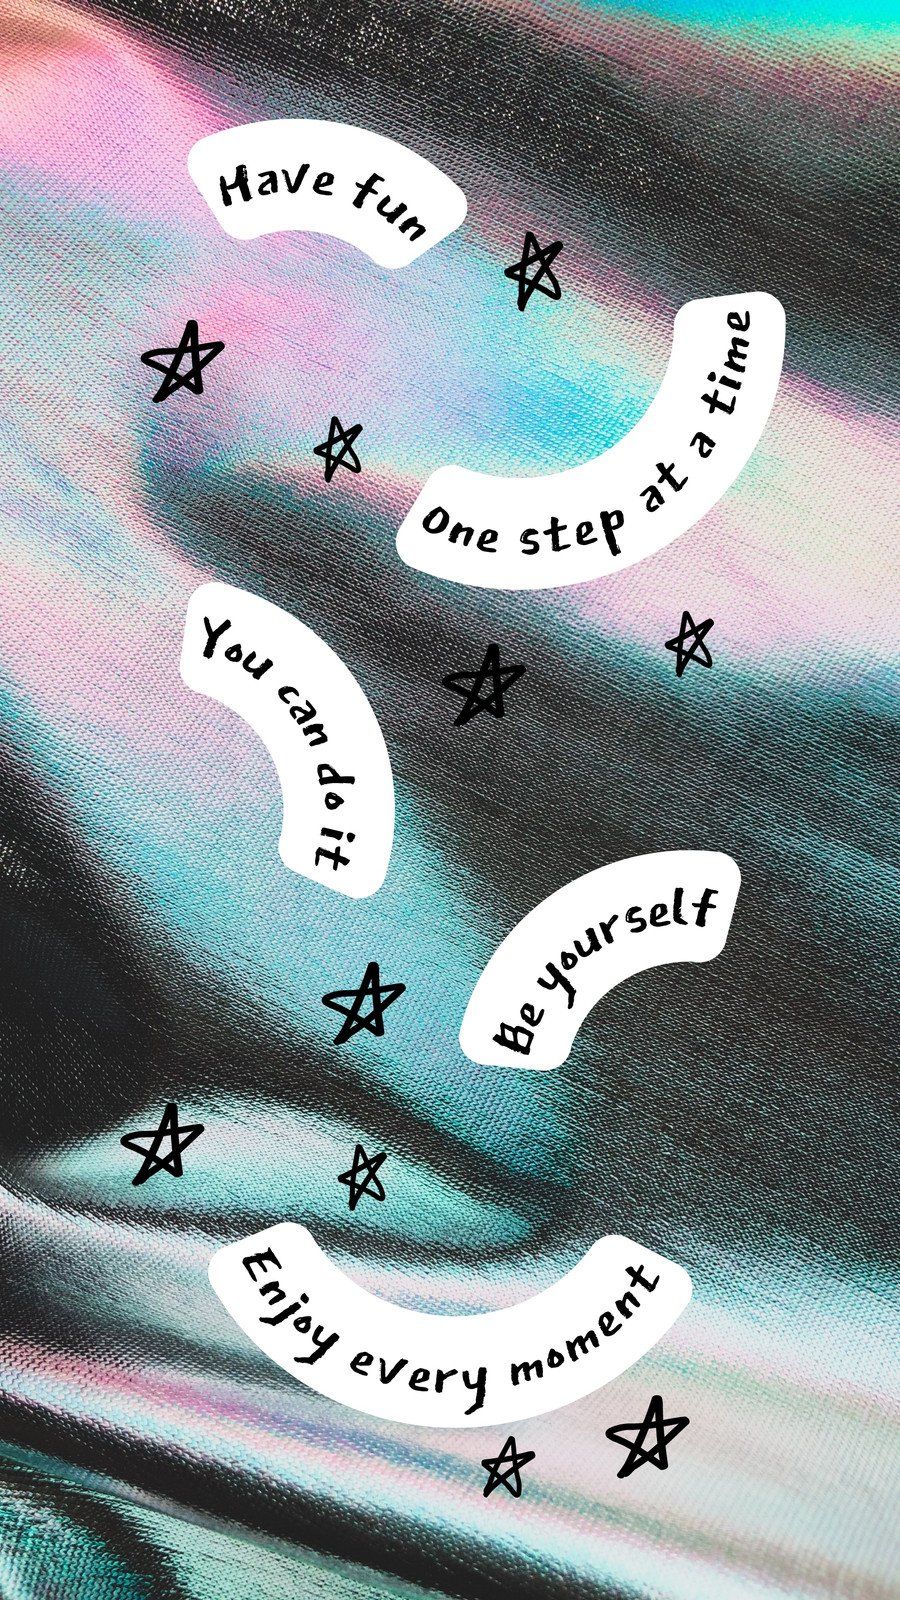 An iPhone wallpaper with a tie-dye background and positive affirmations in black lettering. - Holographic